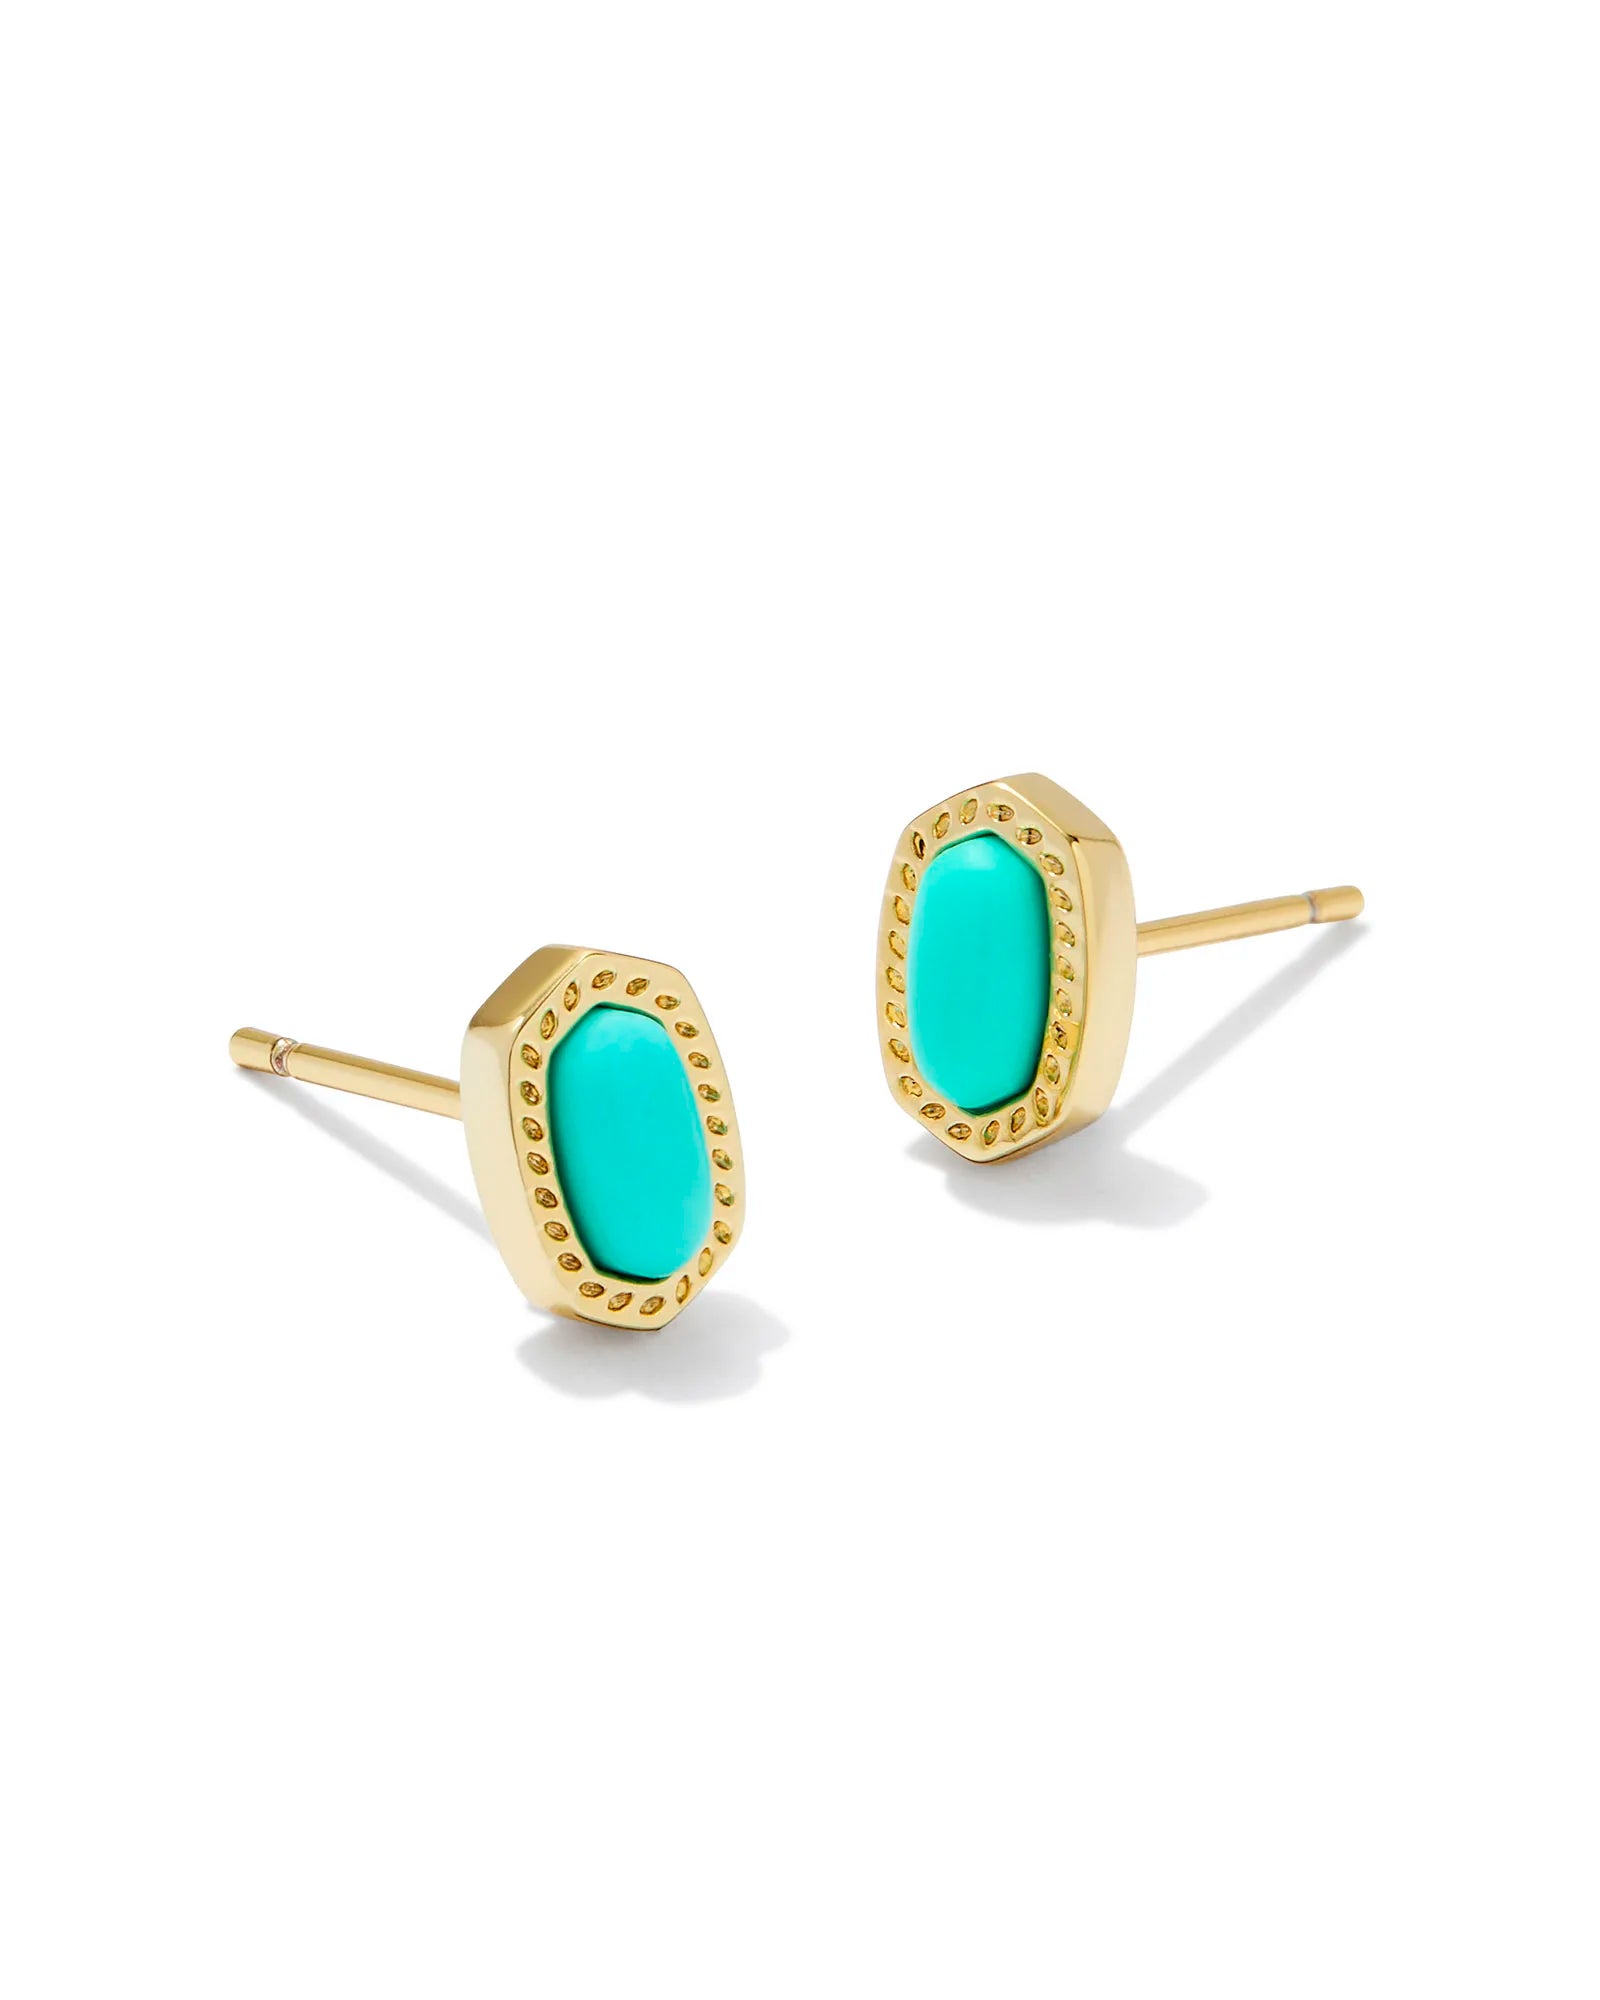 Kendra Scott | Mini Ellie Gold Stud Earrings in Mint Magnesite - Giddy Up Glamour Boutique